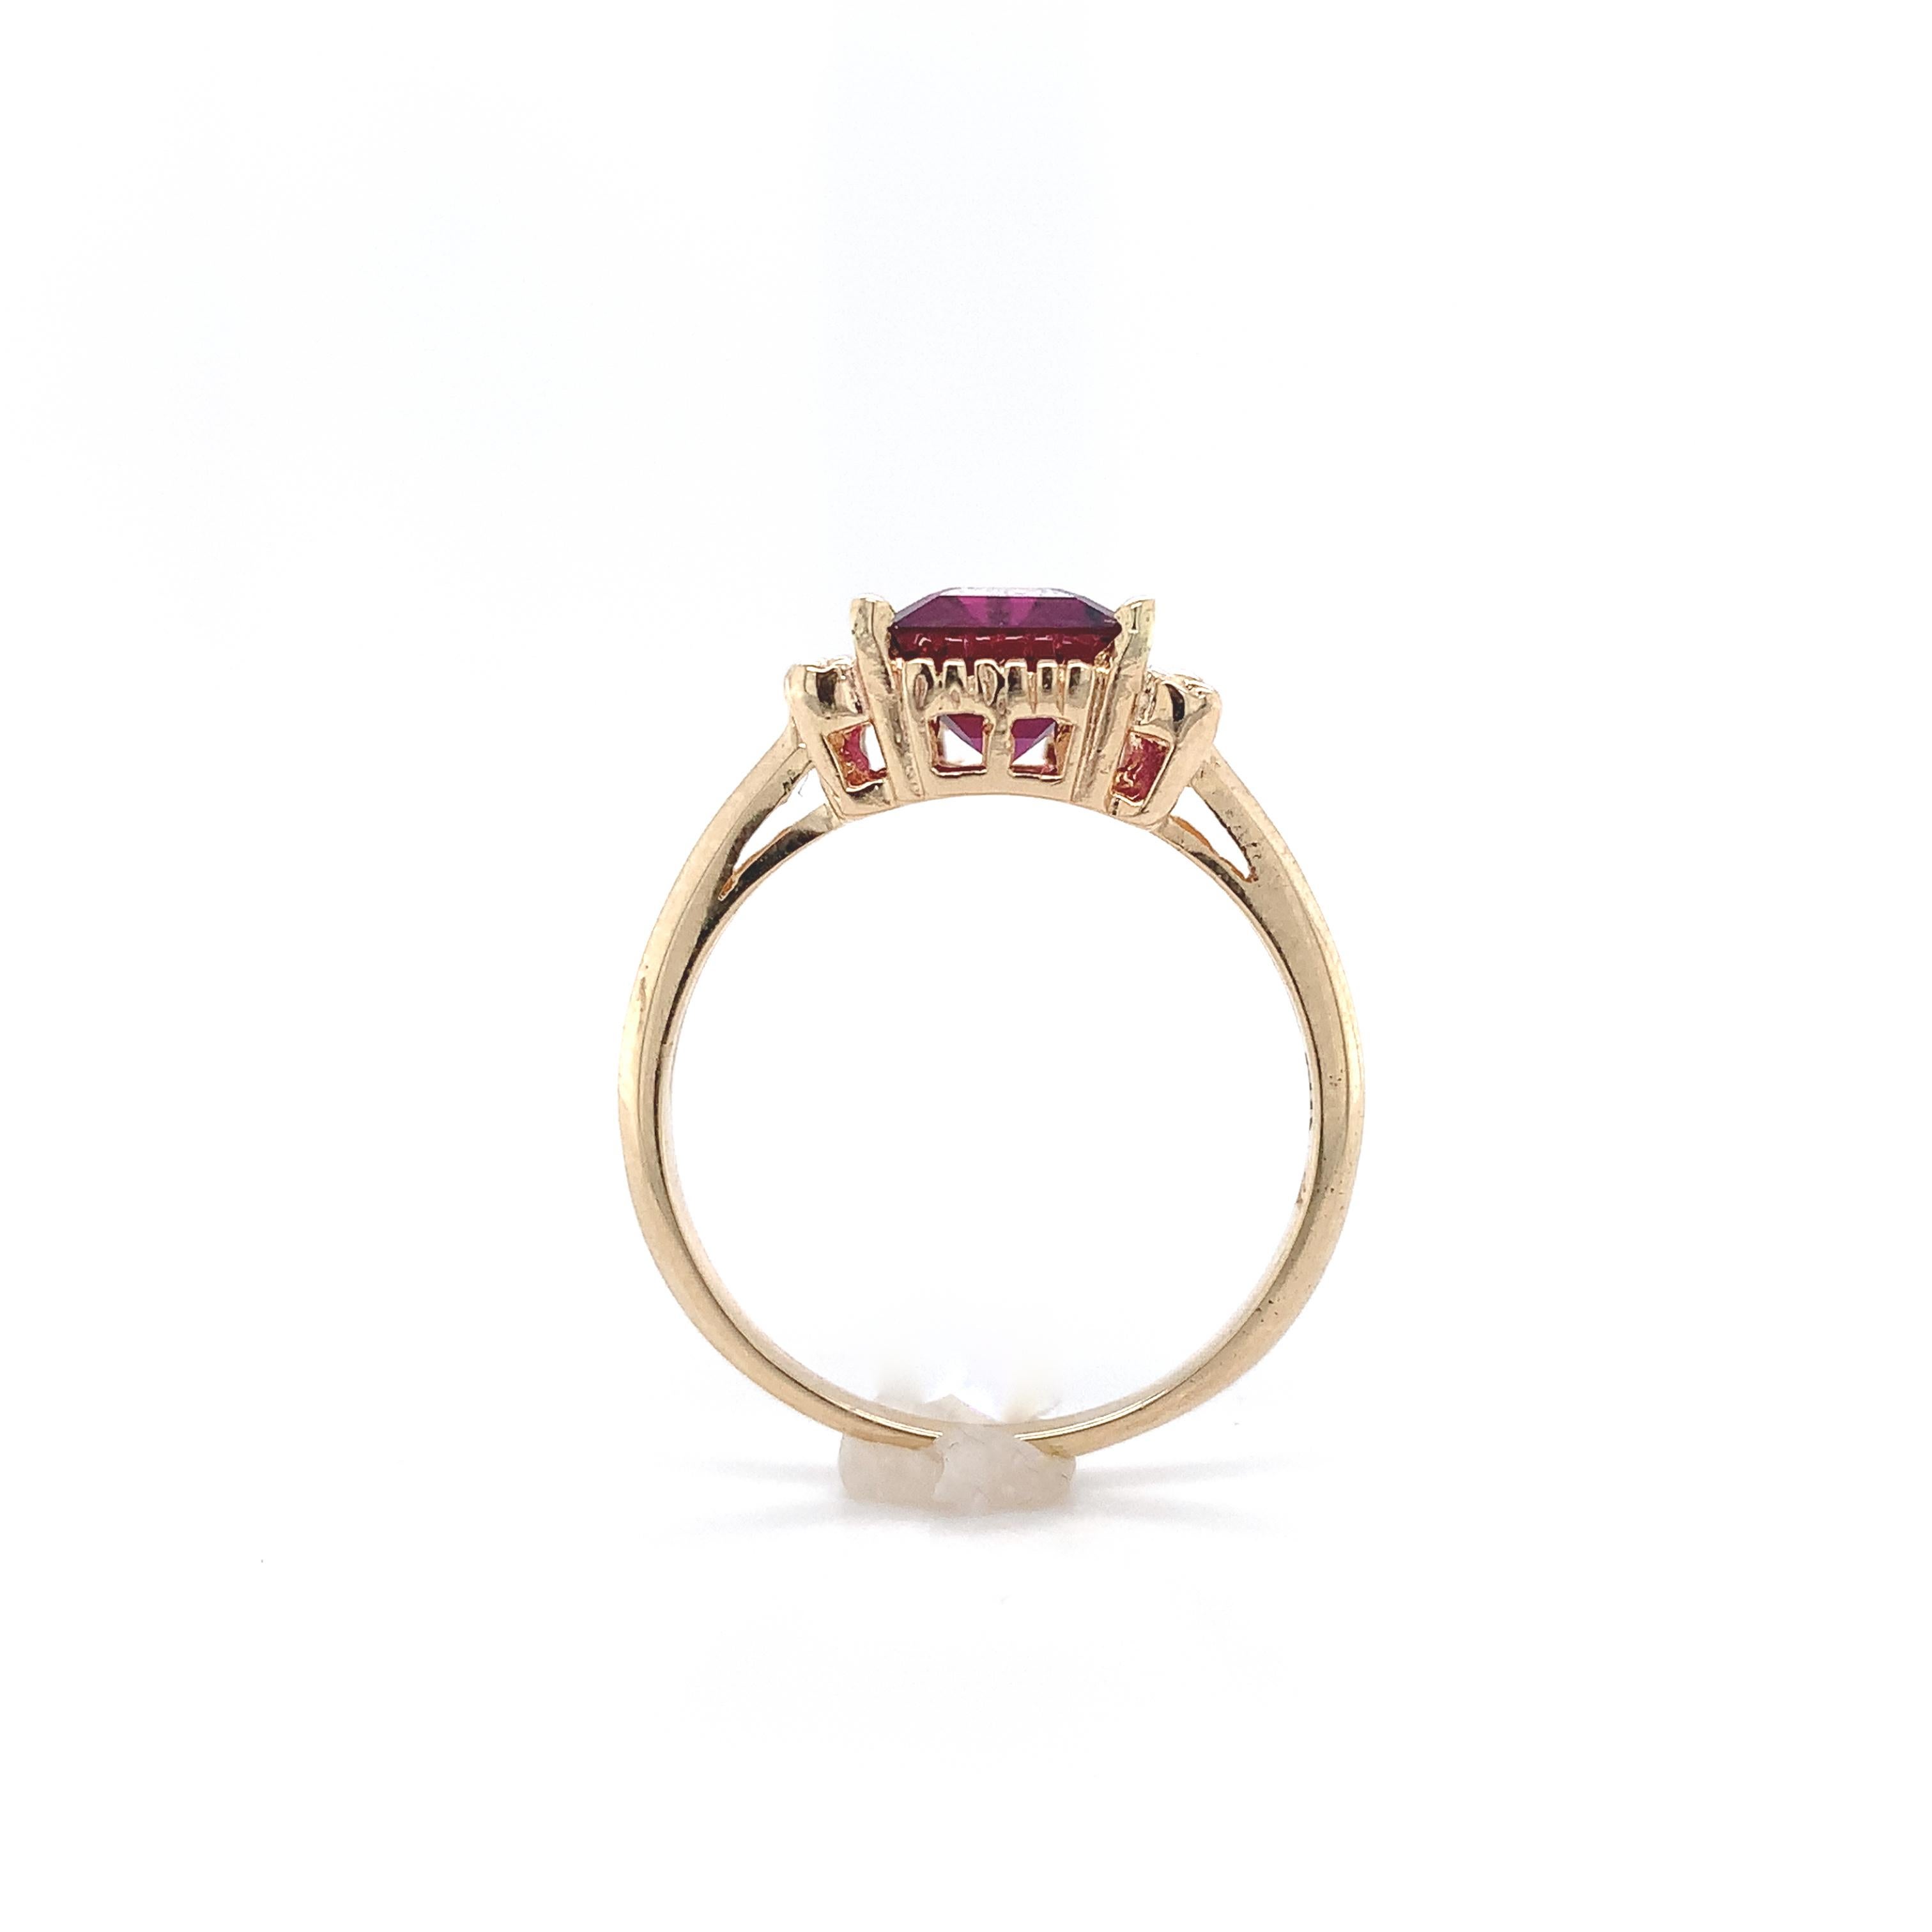 For Sale:  14K Yellow Gold Ring with Emerald Cut 3.51 carat Rhodolite Garnet 2